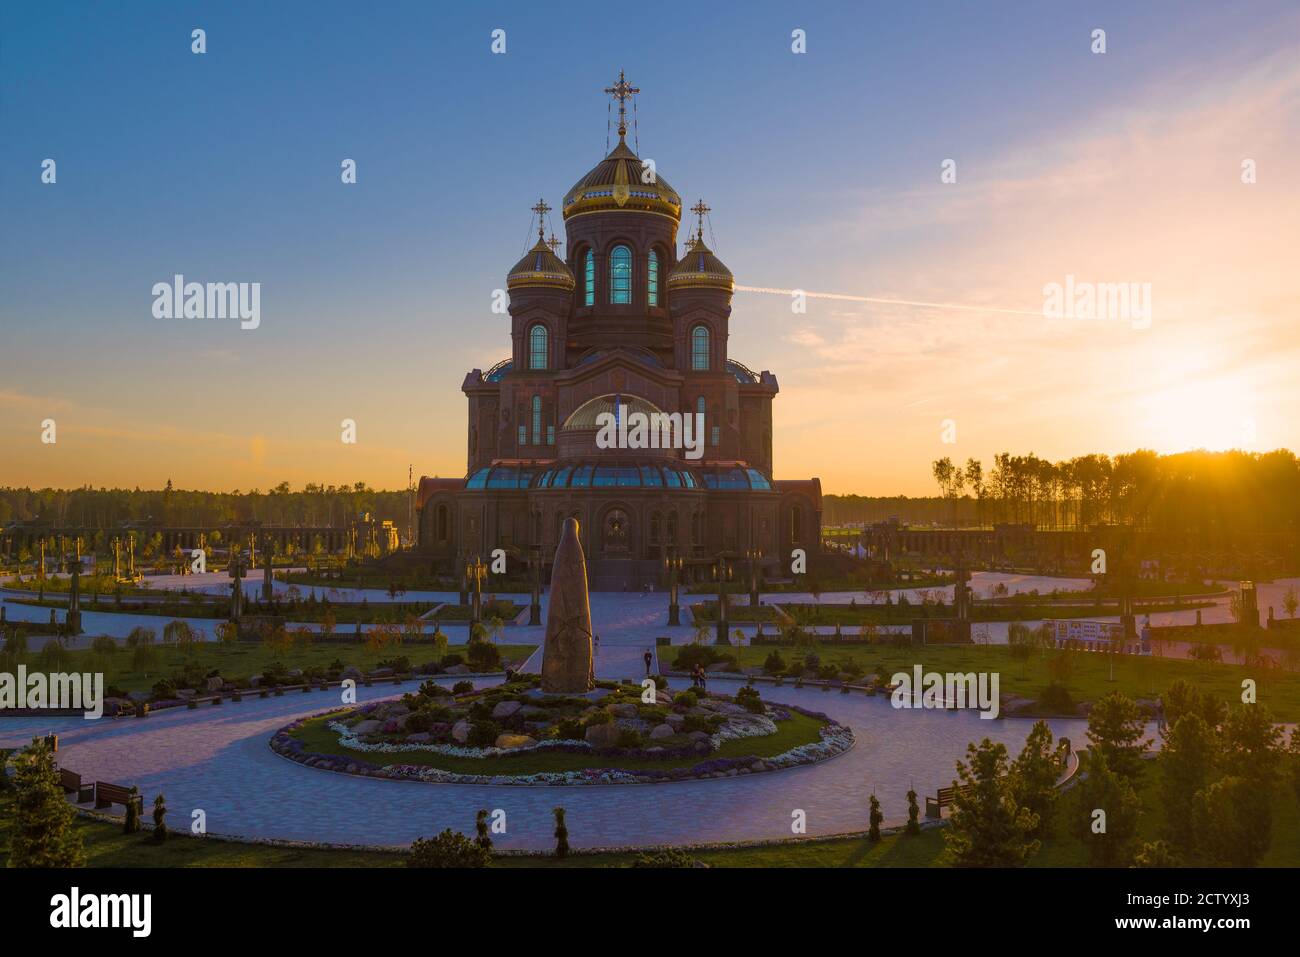 MOSCOW REGION, RUSSIA - AUGUST 25, 2020: The main temple of the Armed Forces of the Russian Federation against the background of the August sunset Stock Photo